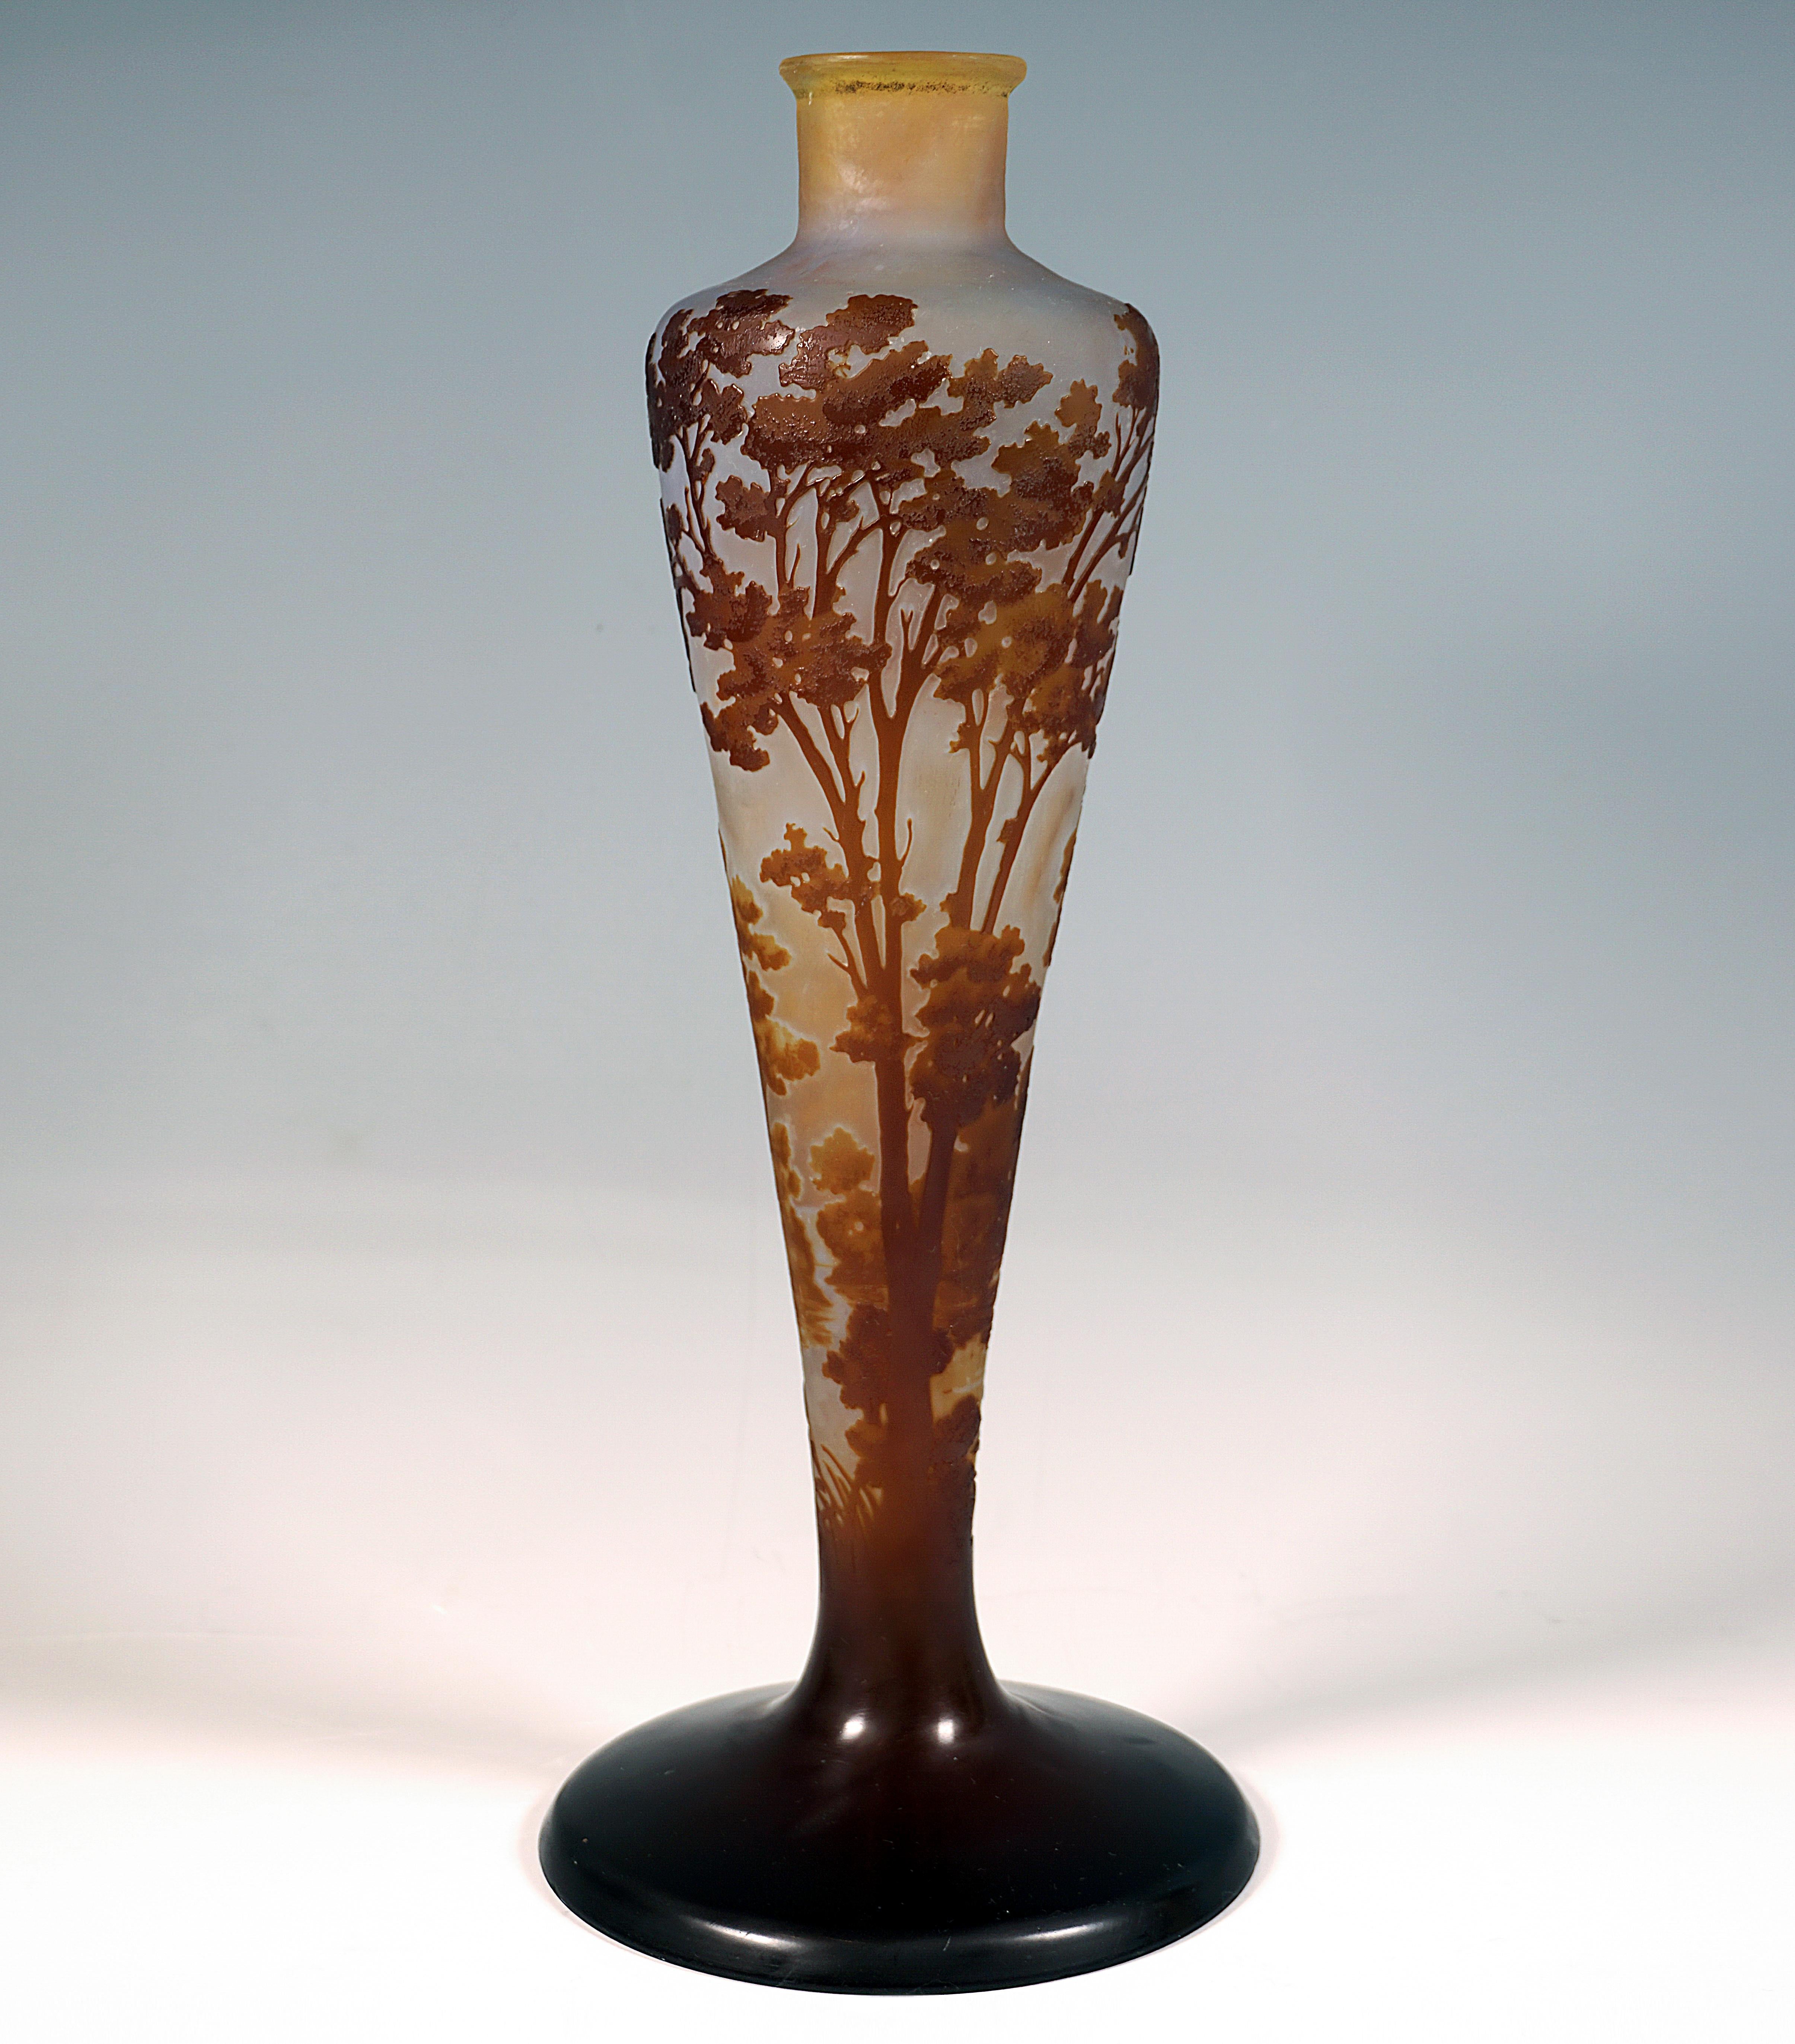 Baluster-shaped vase body on a wide, round base, conical wall that widens upwards, on slightly sloping shoulders a short, narrow neck with a slightly flared mouth edge, colorless glass with honey-colored and dove-blue colored powder inclusions,